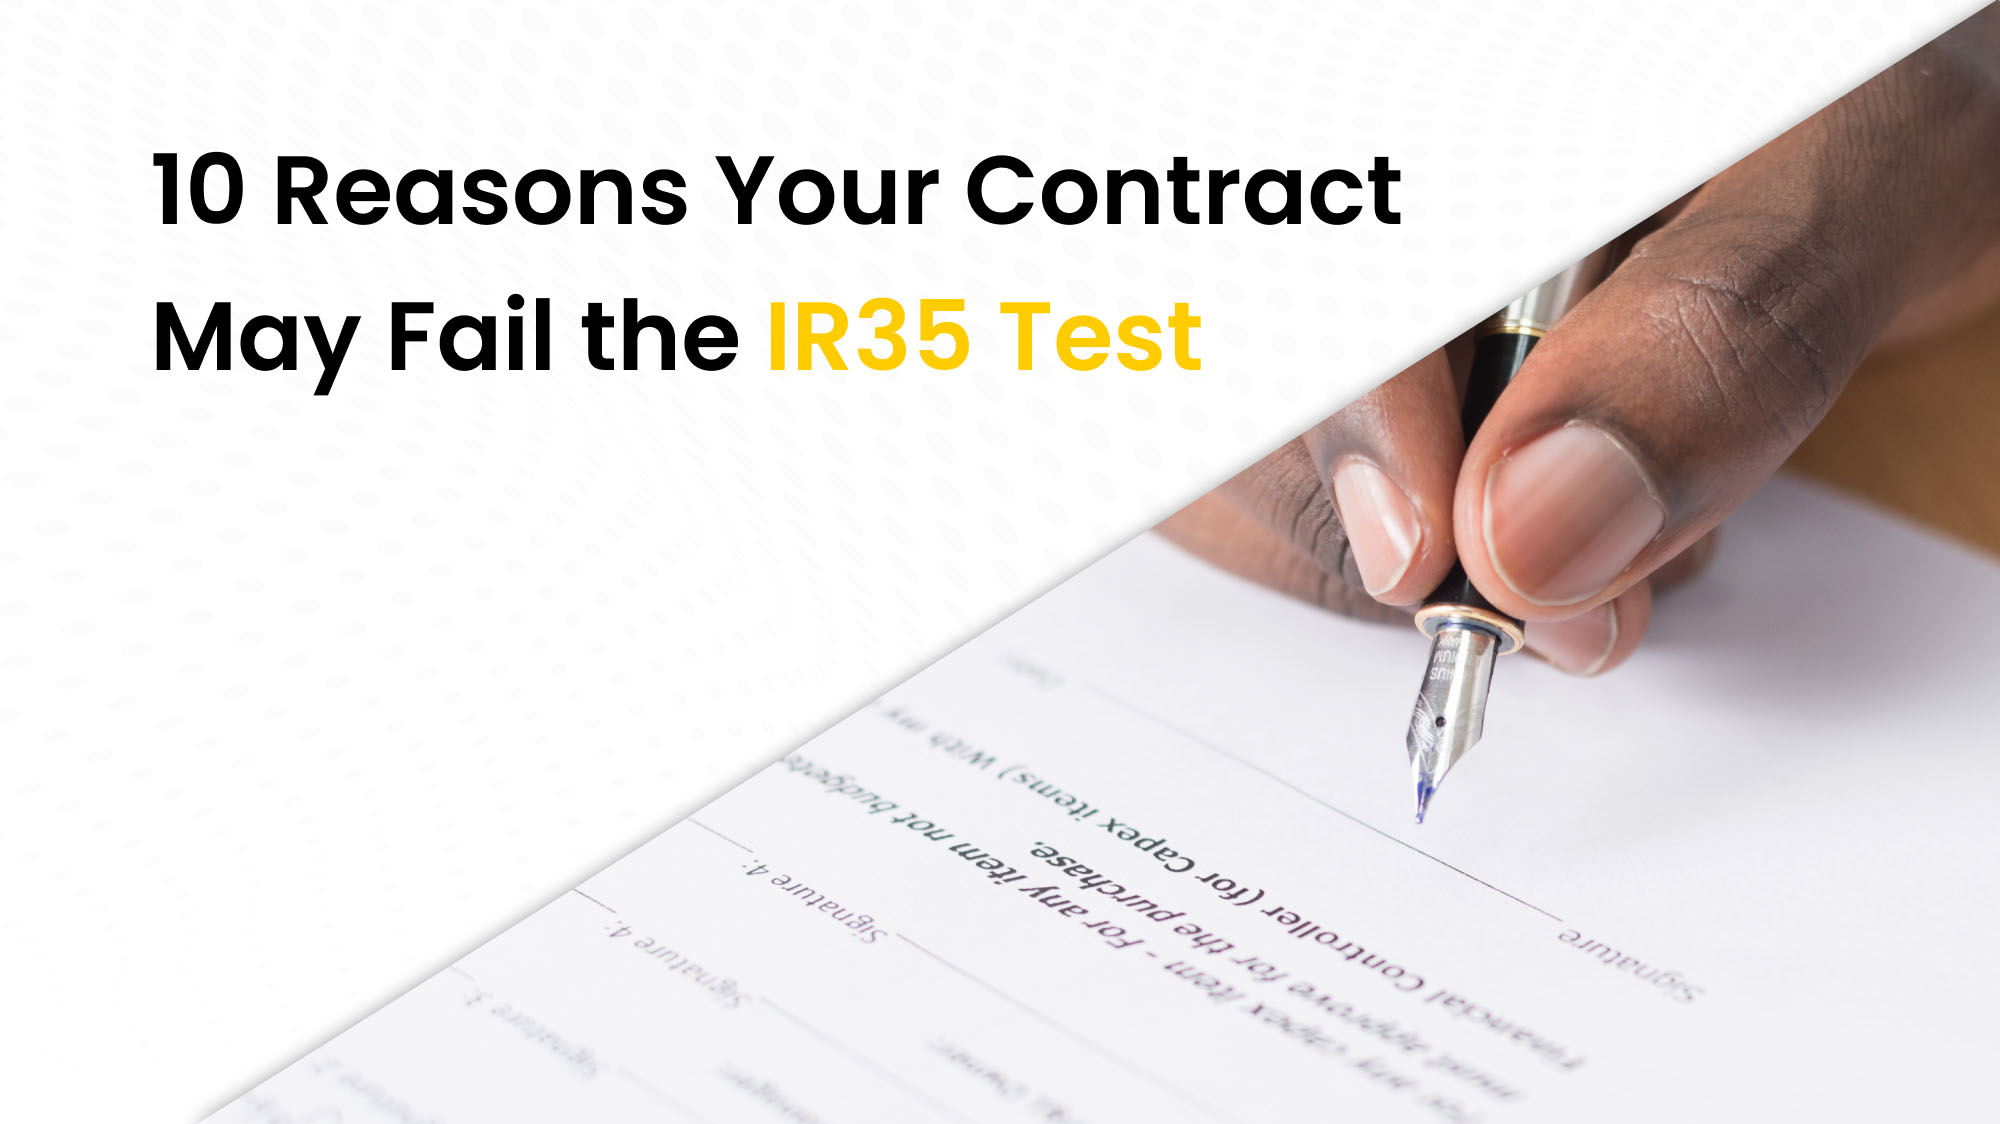 10 reasons your contract may fall the IR35 test